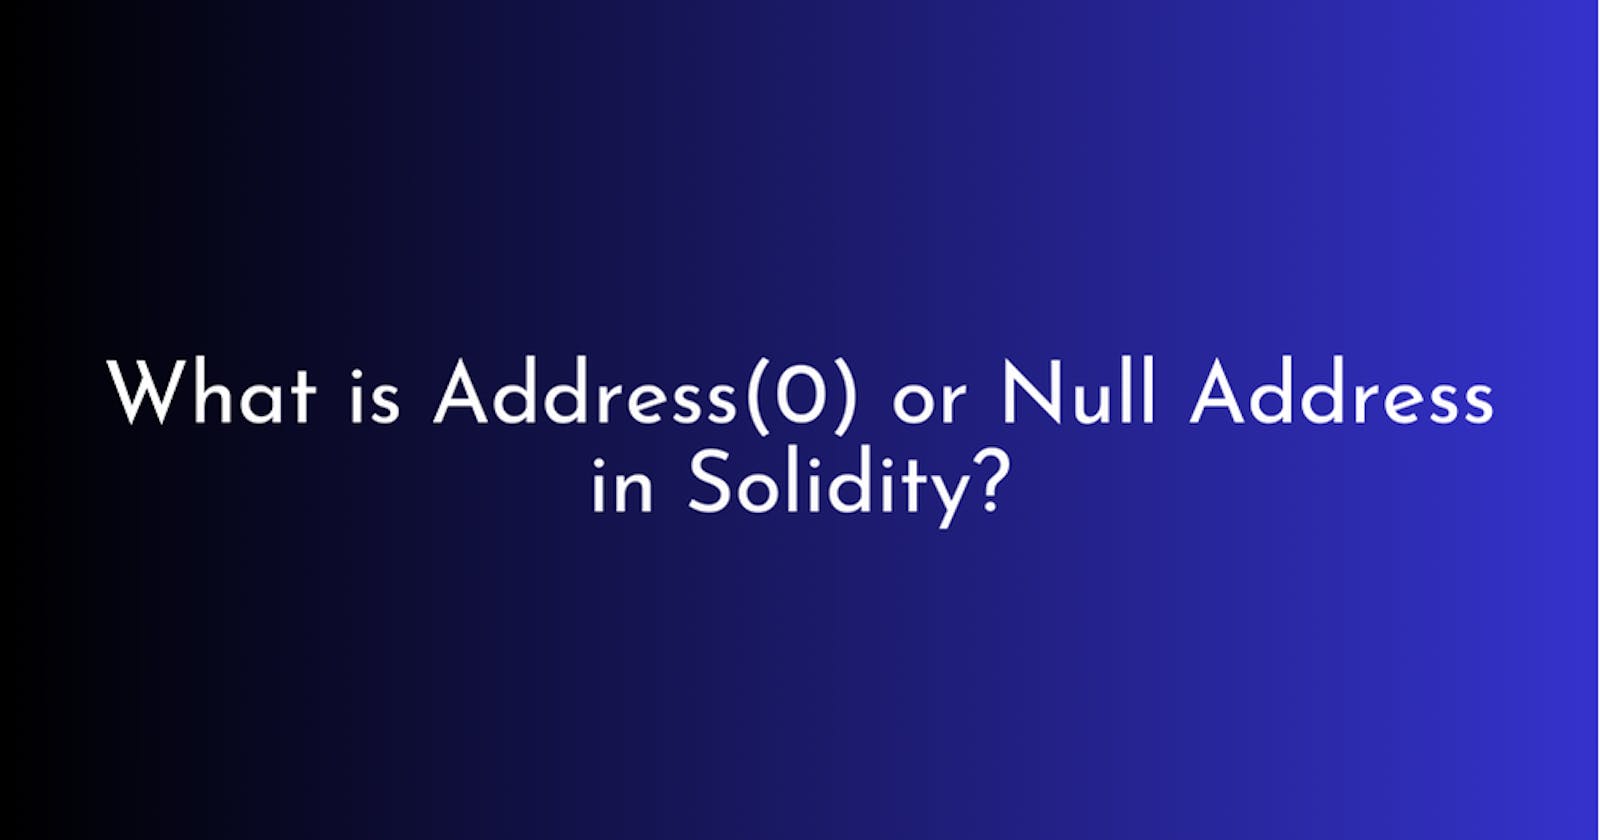 What is Address(0) or Null Address in Solidity?